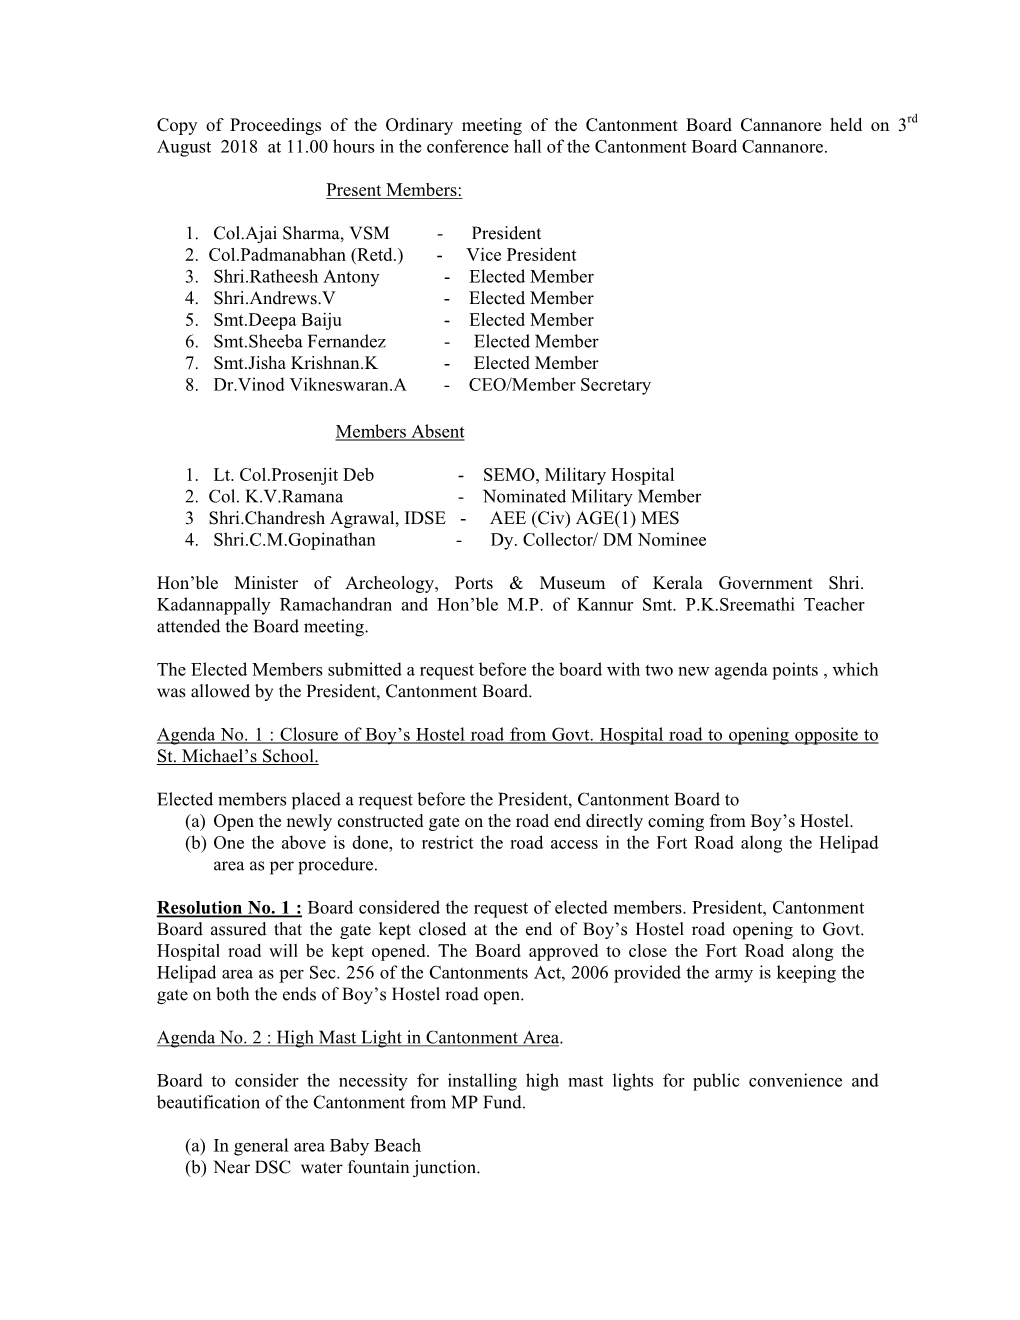 Copy of Proceedings of the Ordinary Meeting of the Cantonment Board